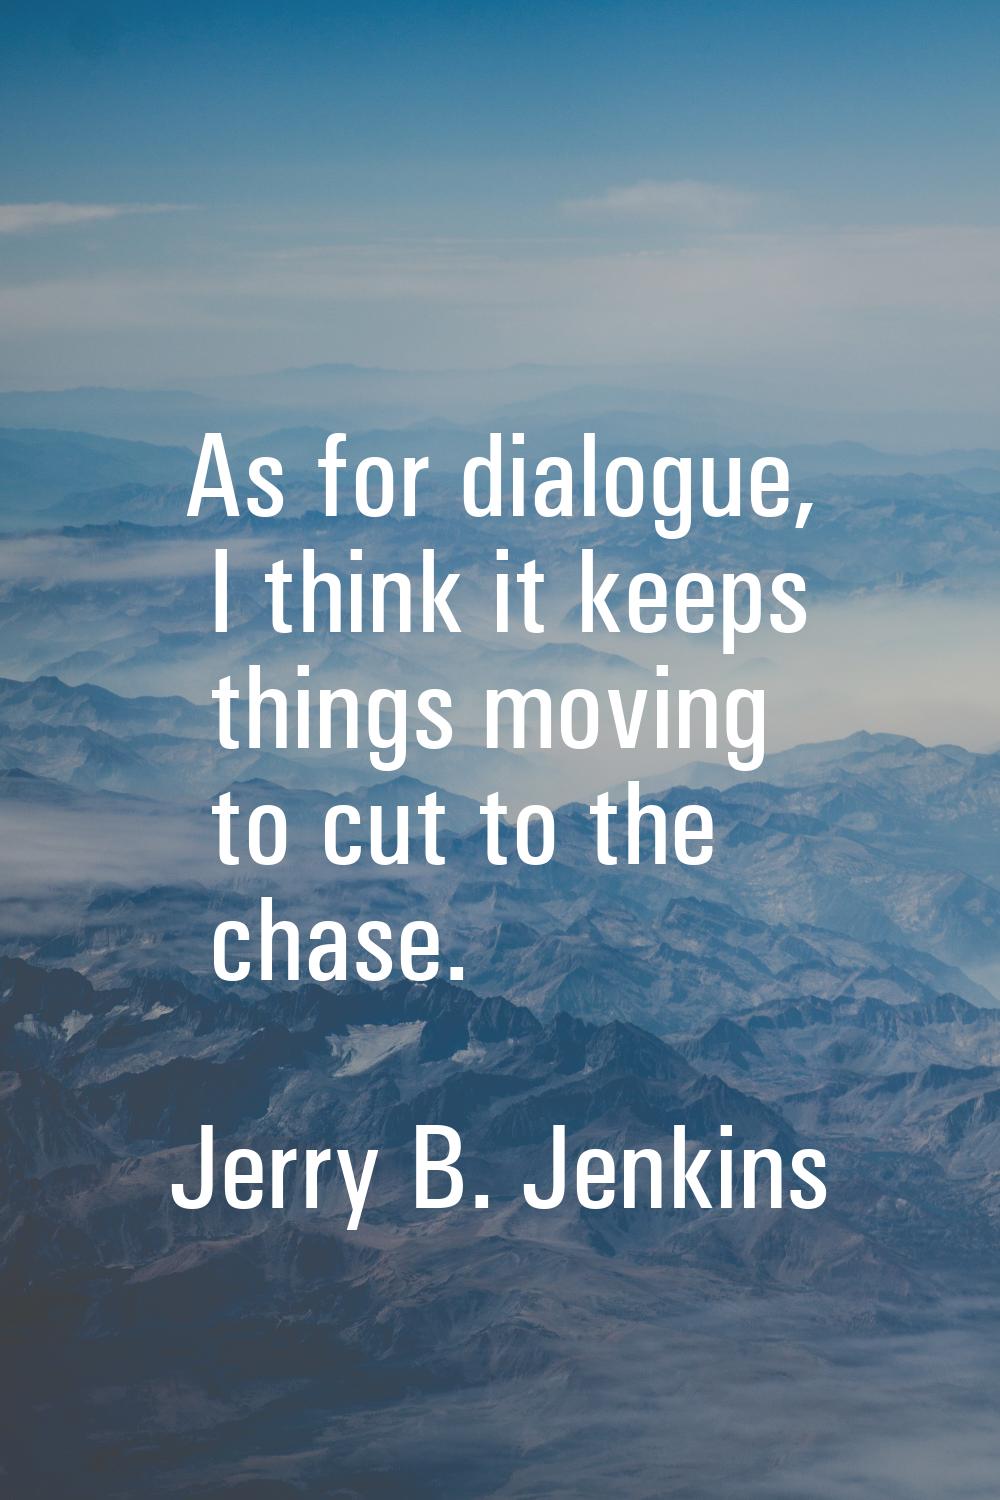 As for dialogue, I think it keeps things moving to cut to the chase.